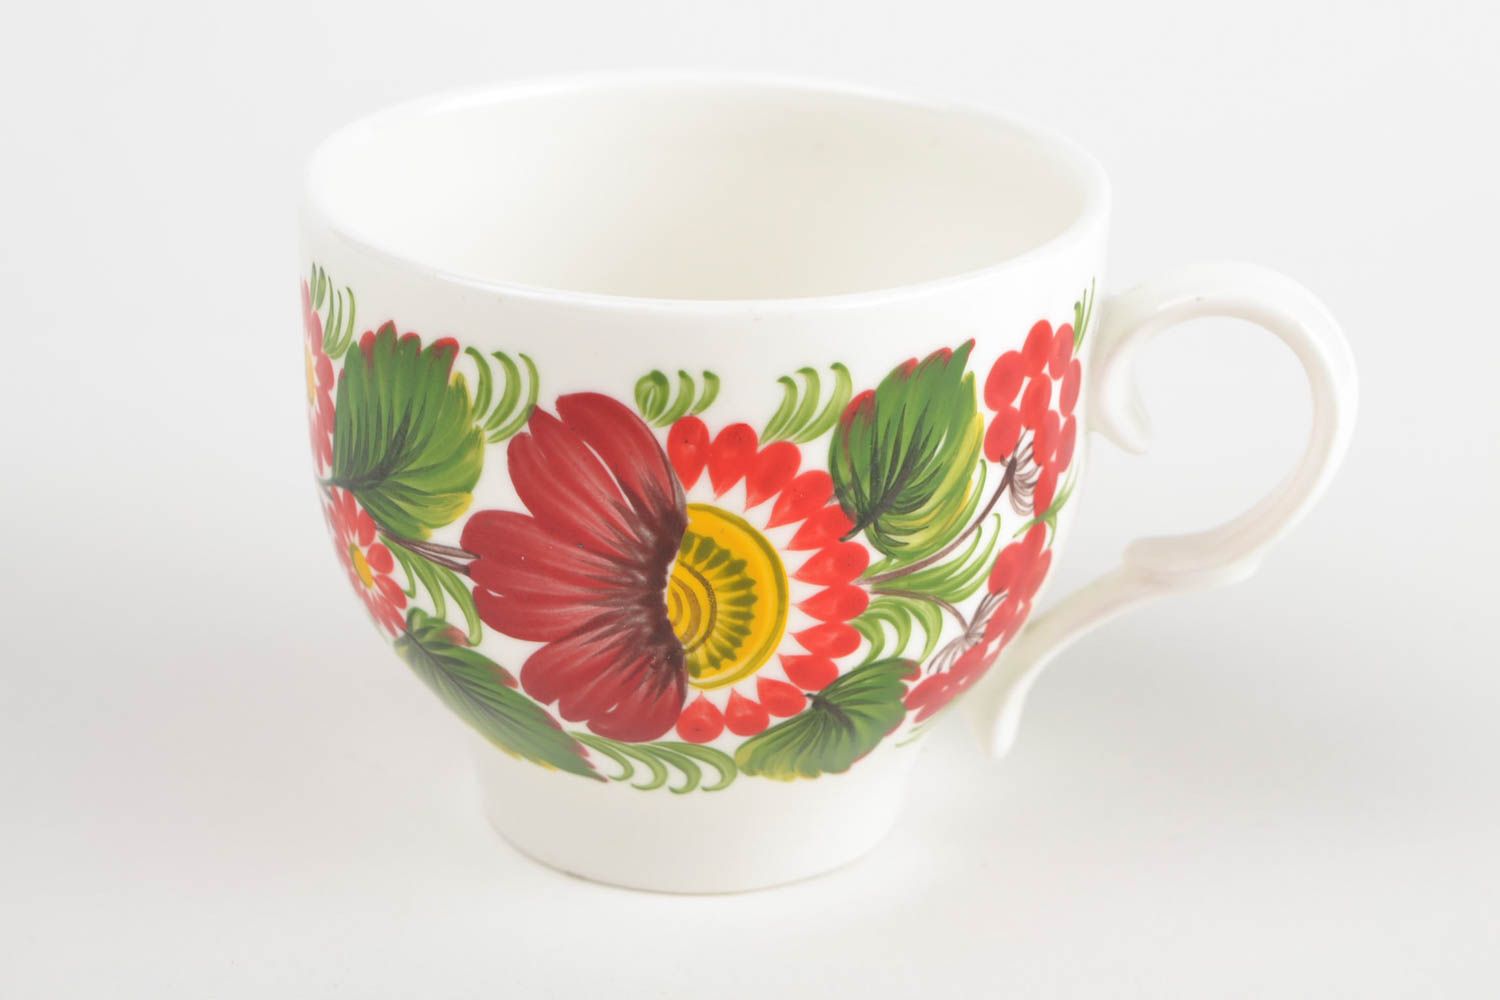 7 oz porcelain tea cup in white, green, red floral design with handle photo 3